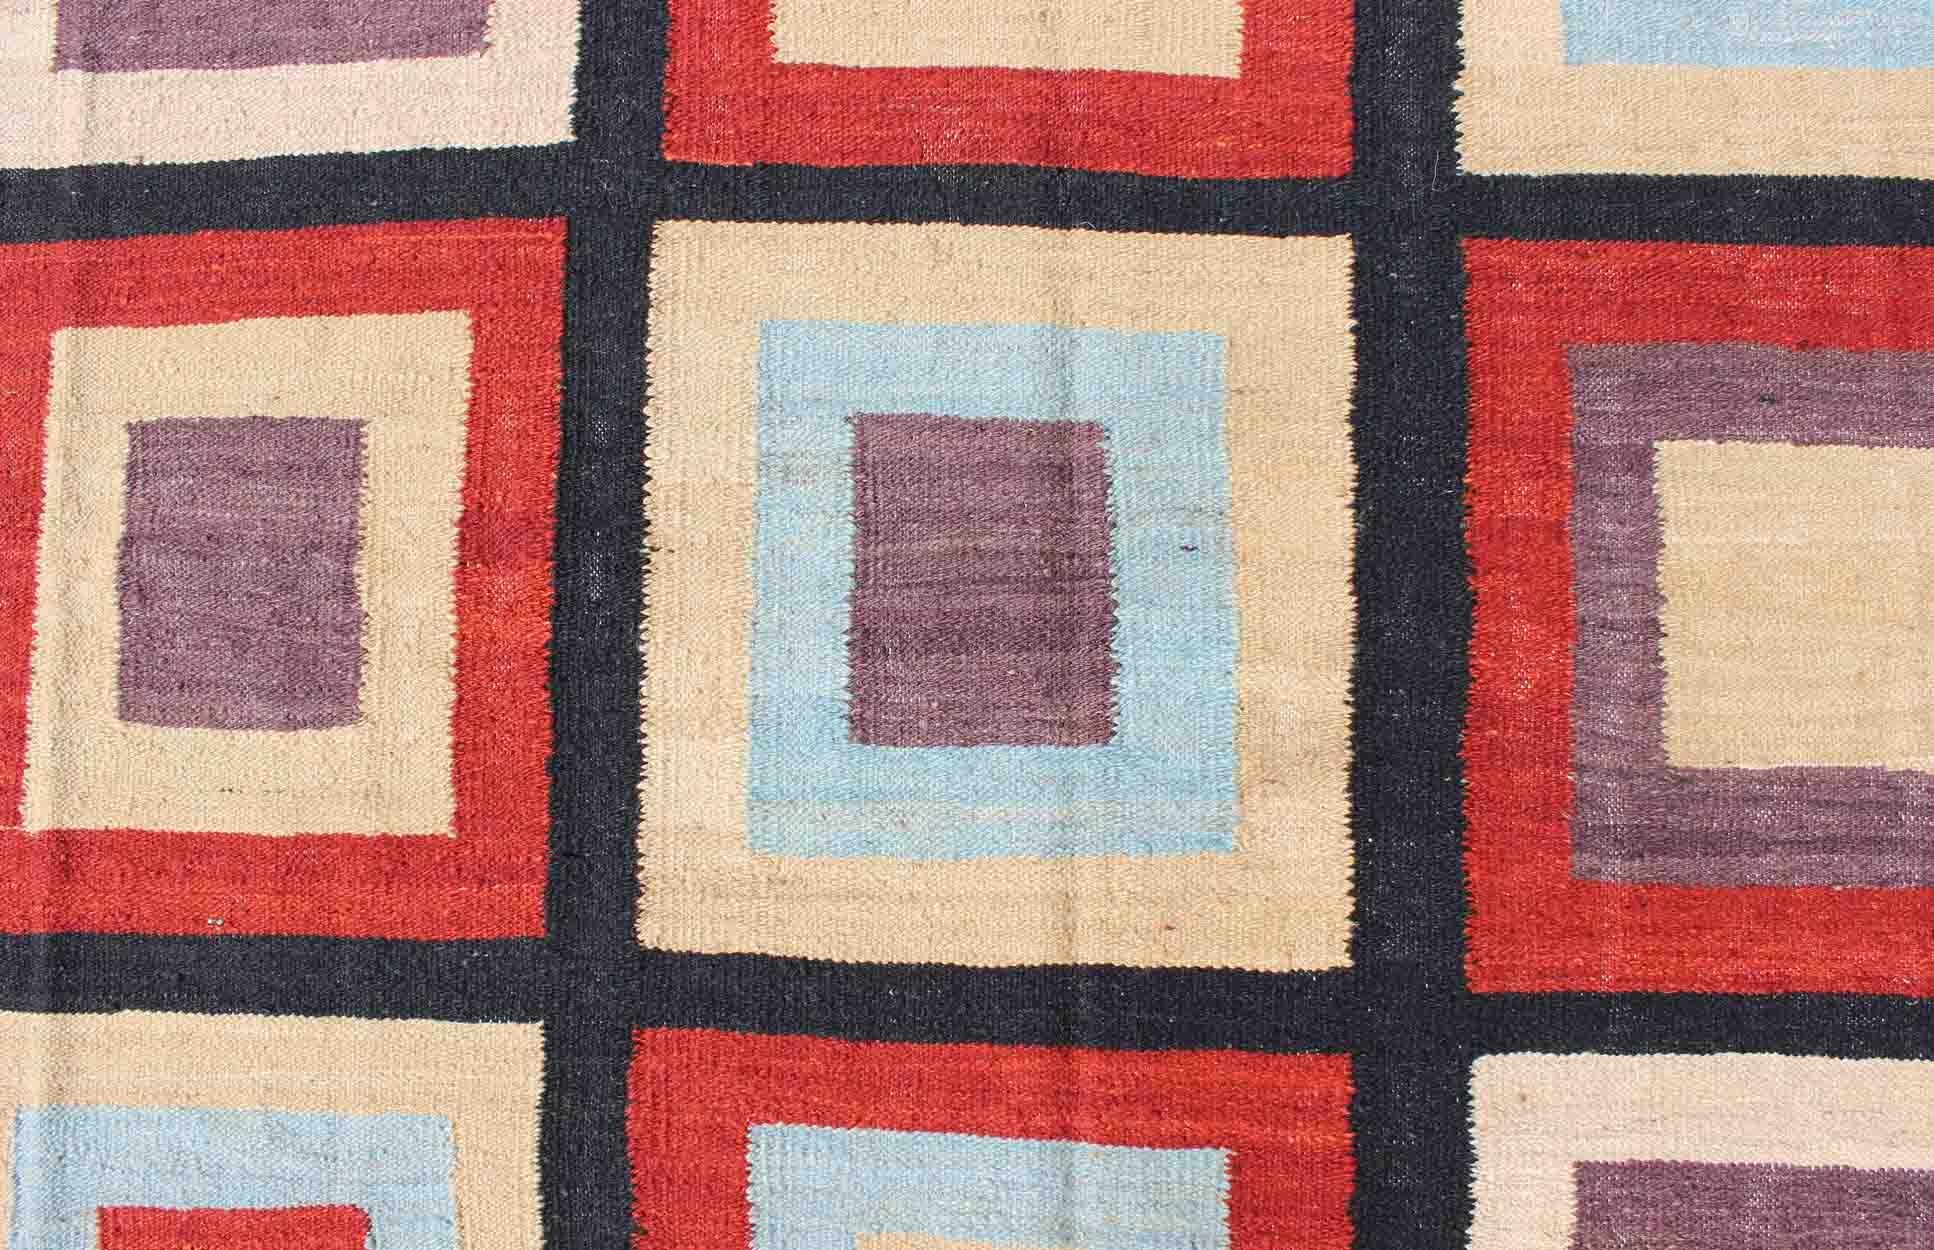 Wool Large Modern Kilim Rug with Squared Design in Red, Blue, Black, Cream, Purple